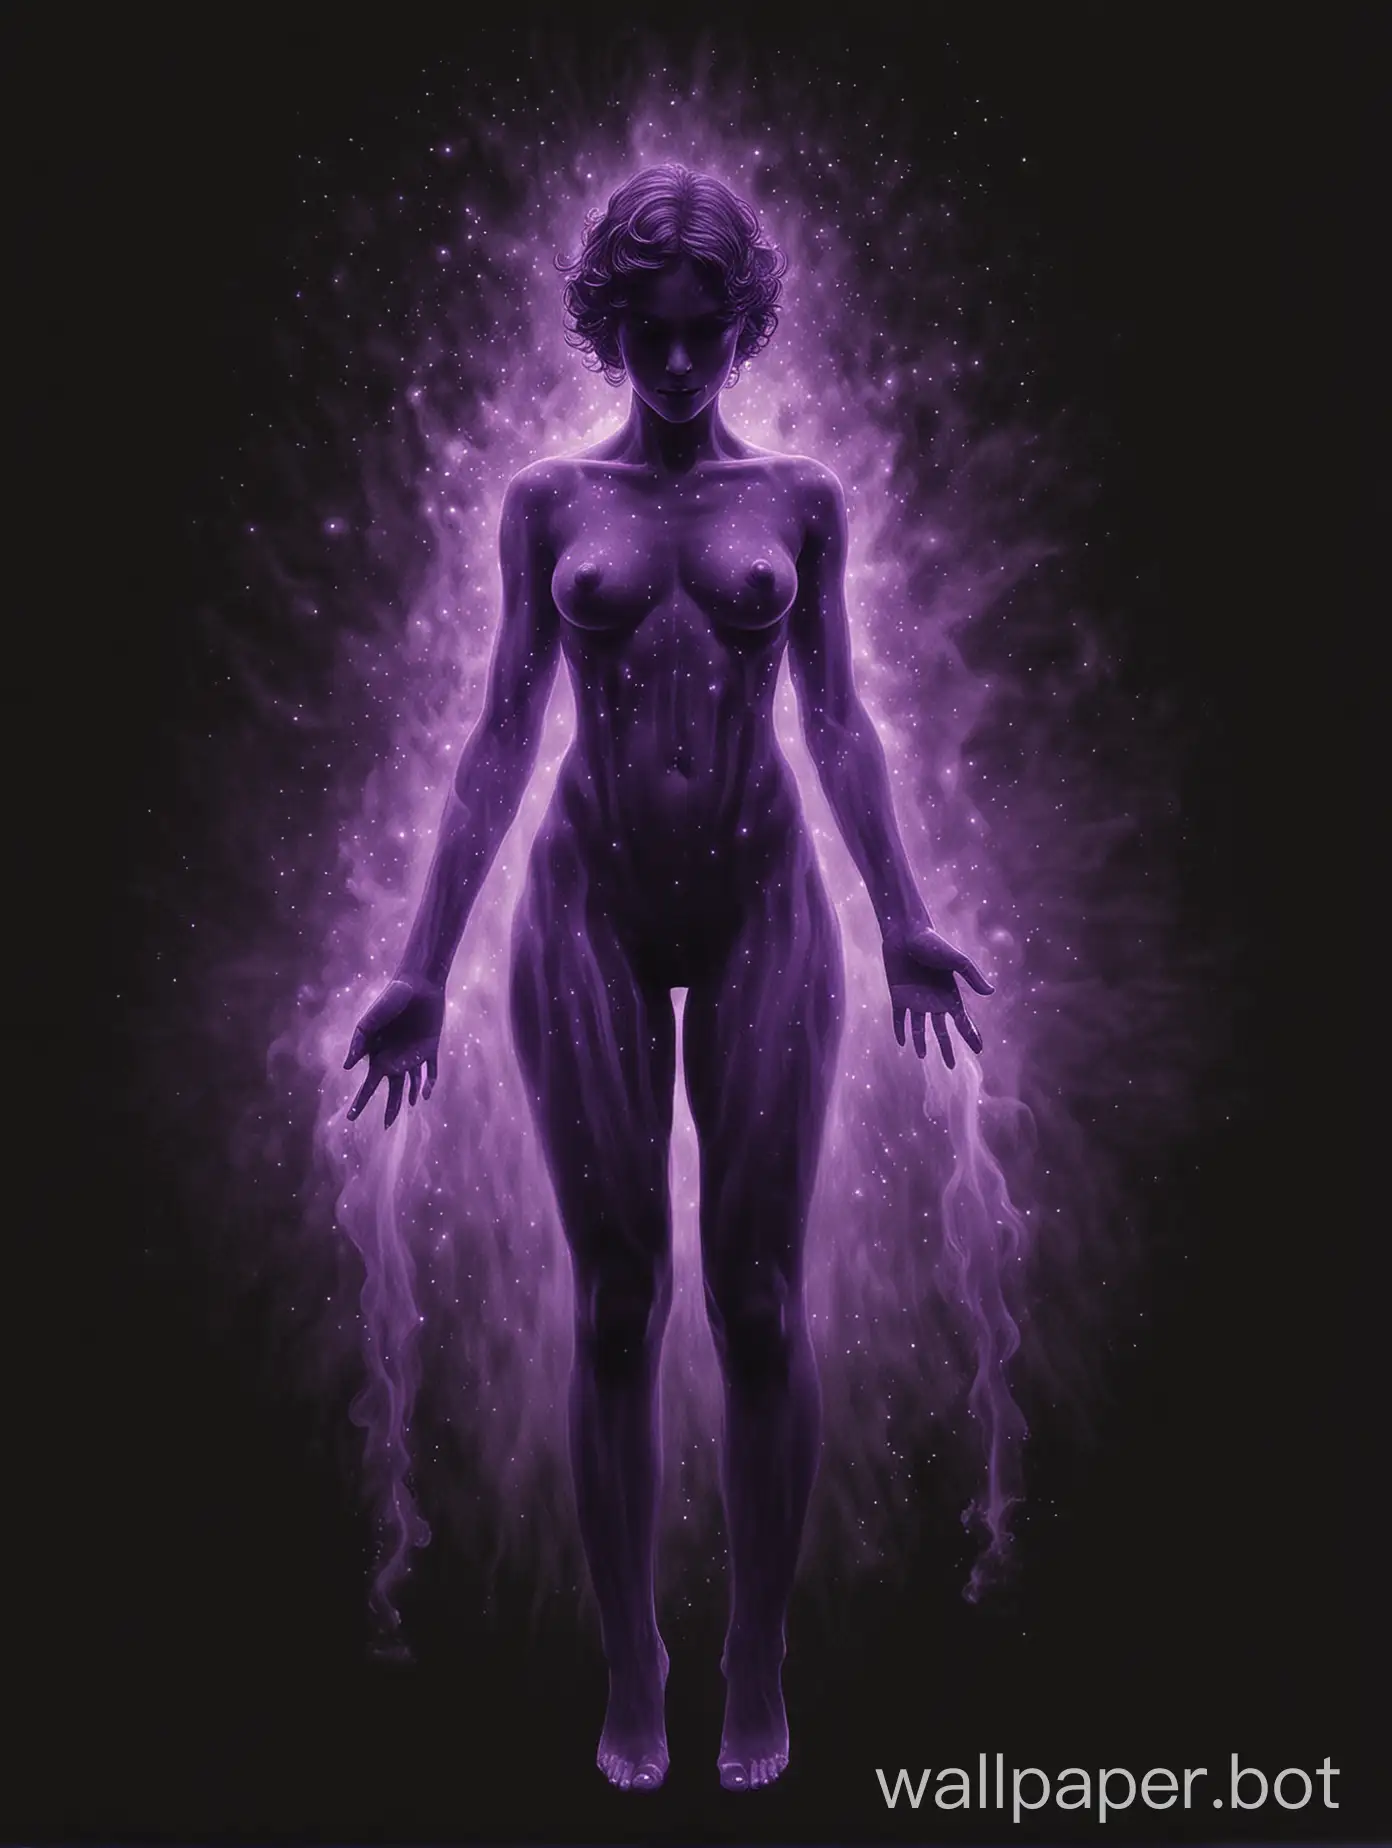 Draw a cluster of purple mist in the shape of a person on a black background.